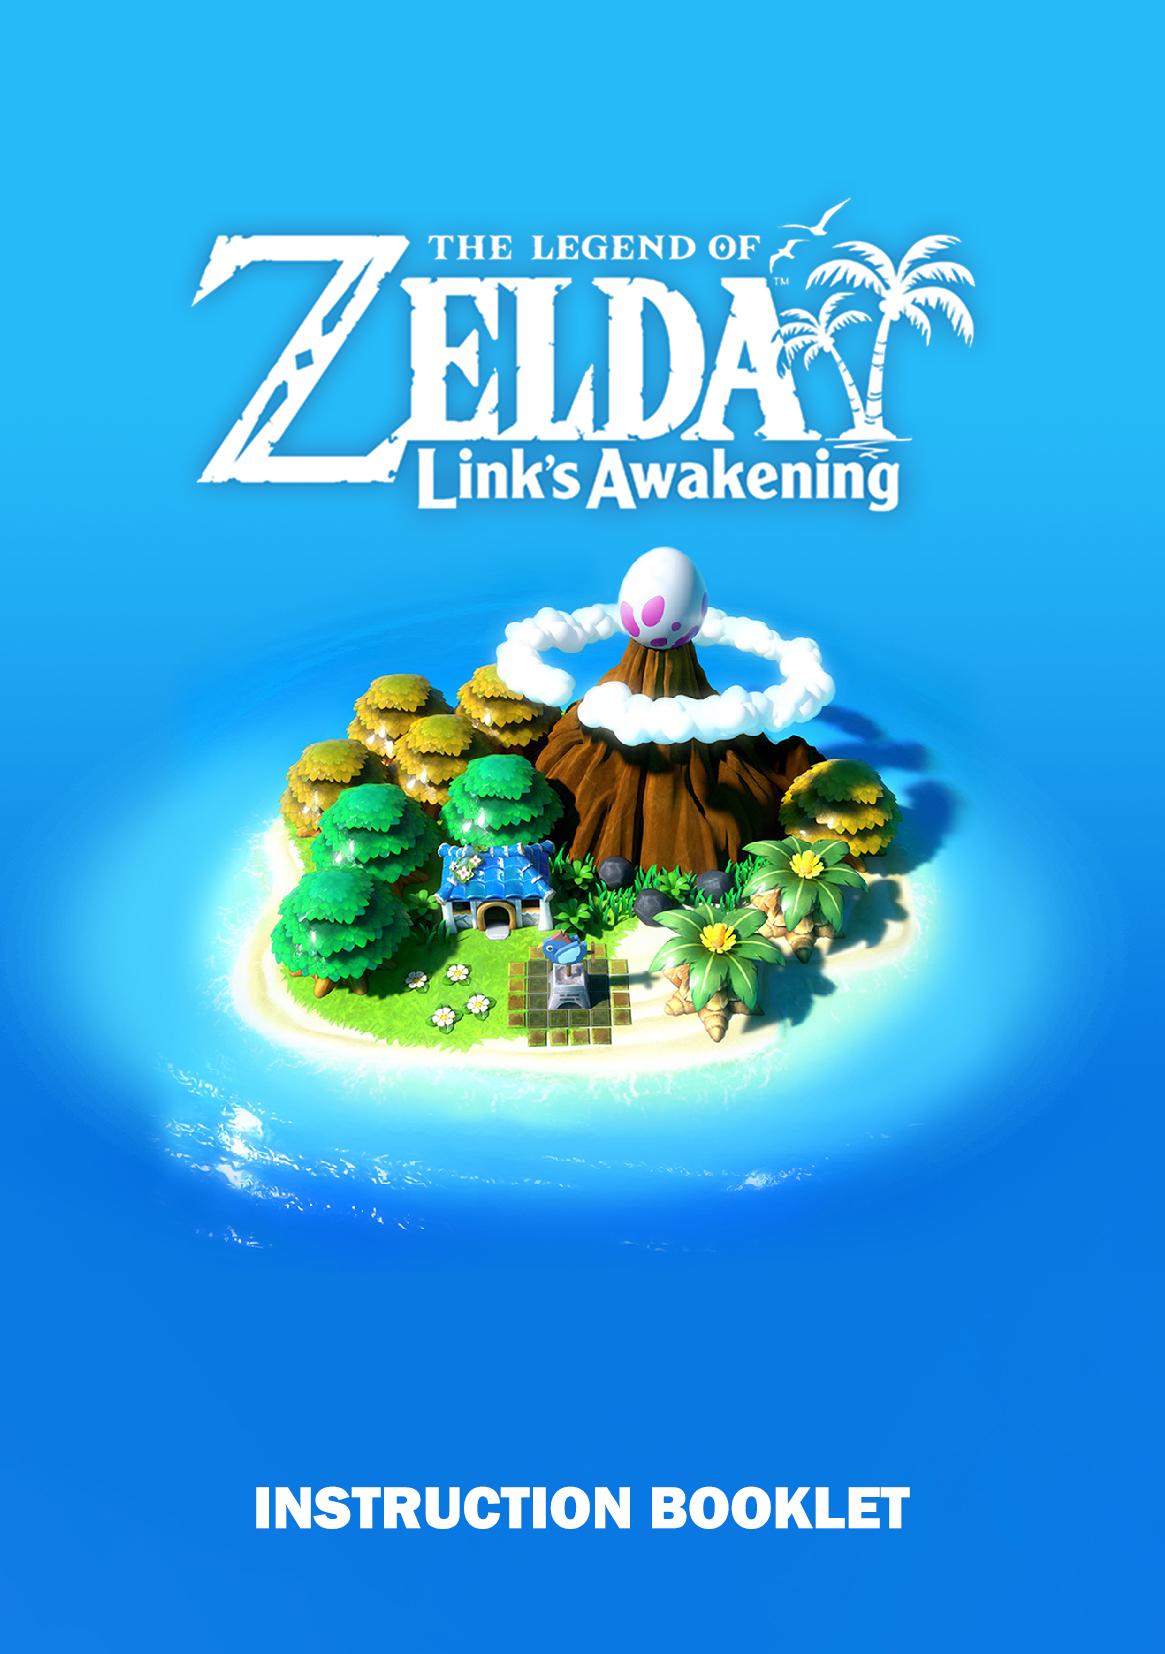 The Legend of Zelda: Link's Awakening review: the perfect gateway